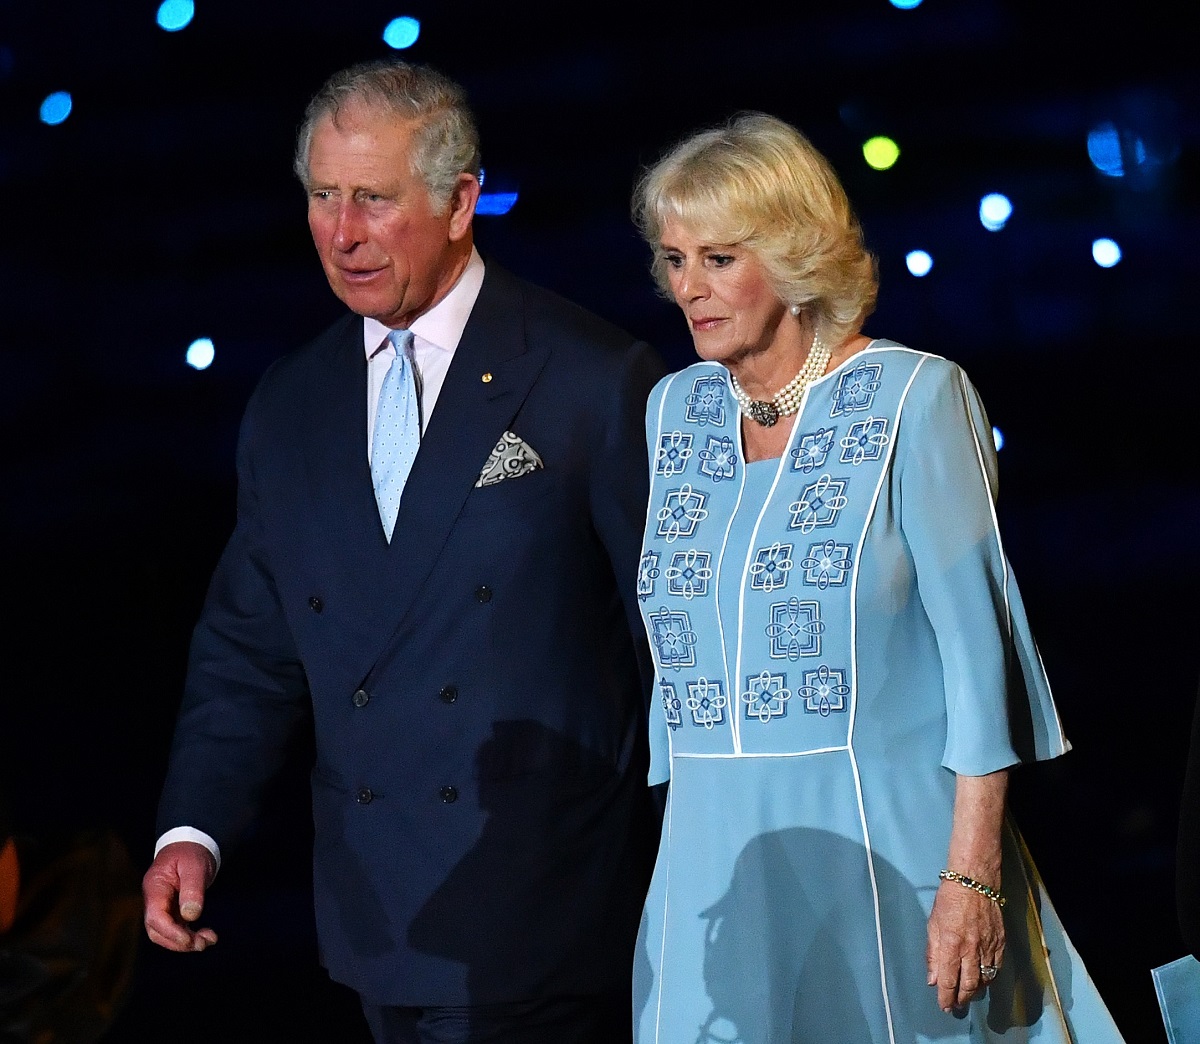 Then-Prince Charles and Camilla Parker Bowles arrive at the Opening Ceremony for the Gold Coast 2018 Commonwealth Games